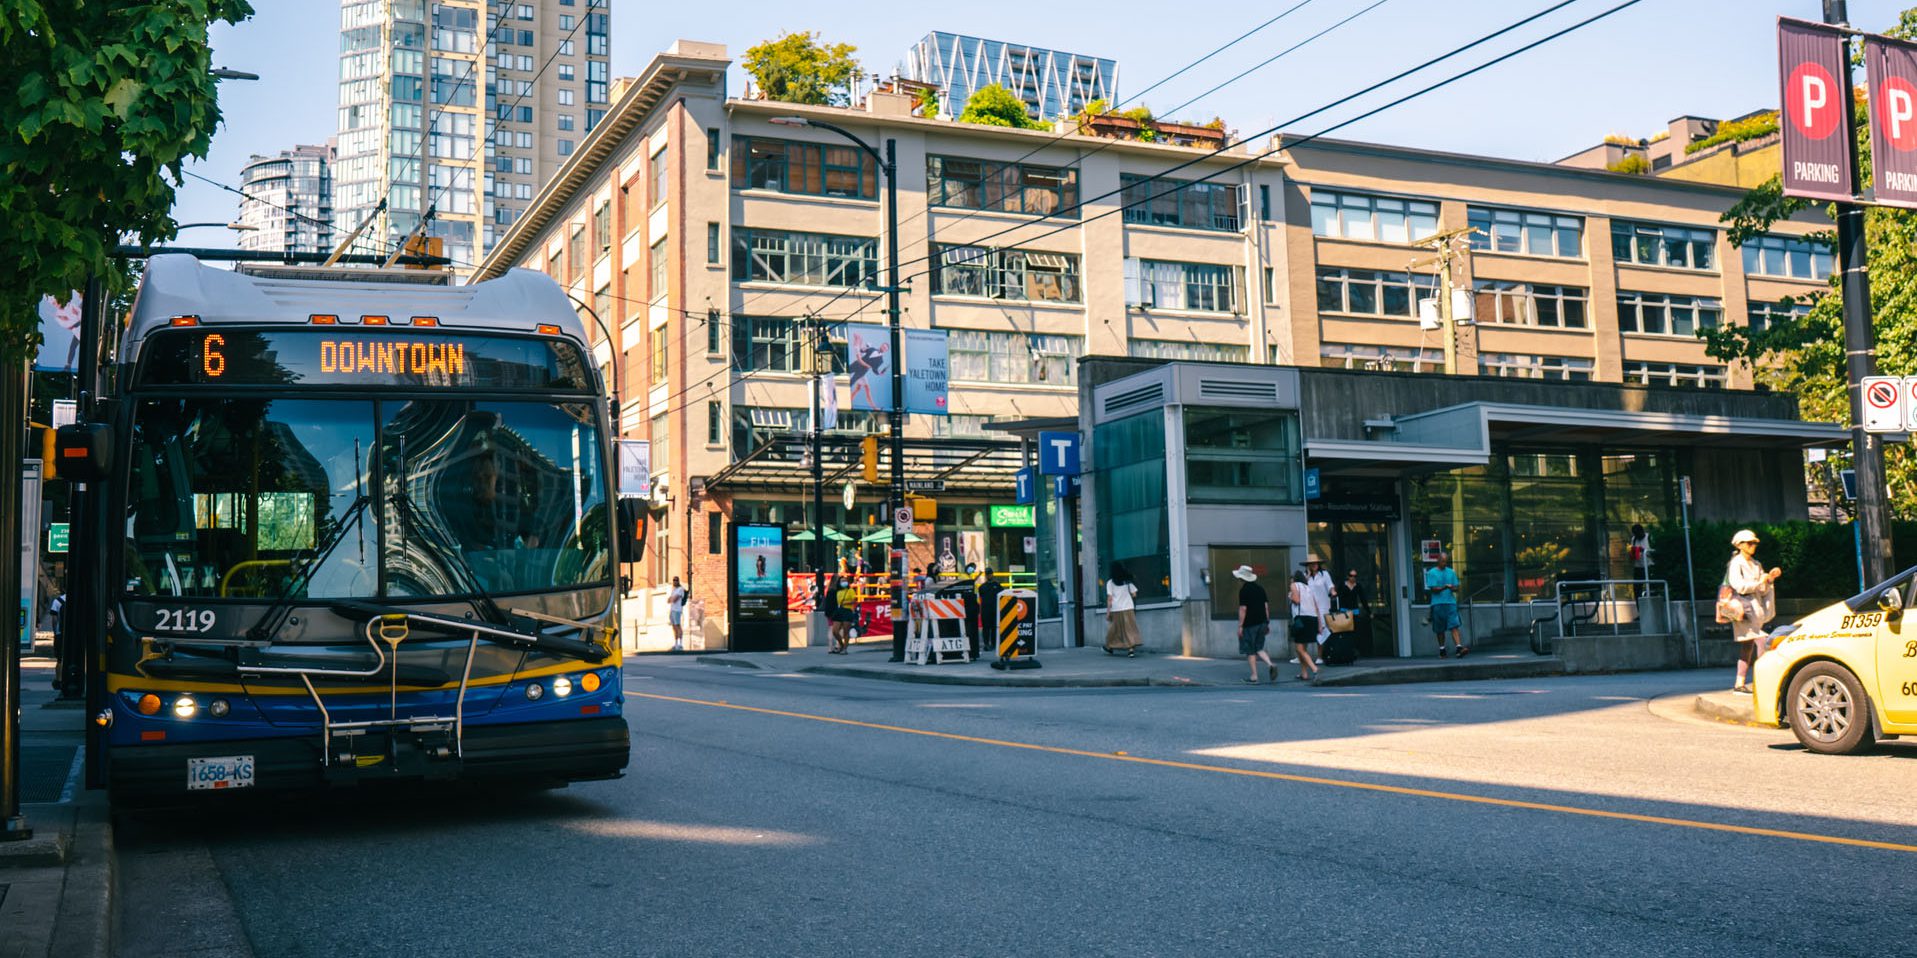 A bus passing through Yaletown Vancouver